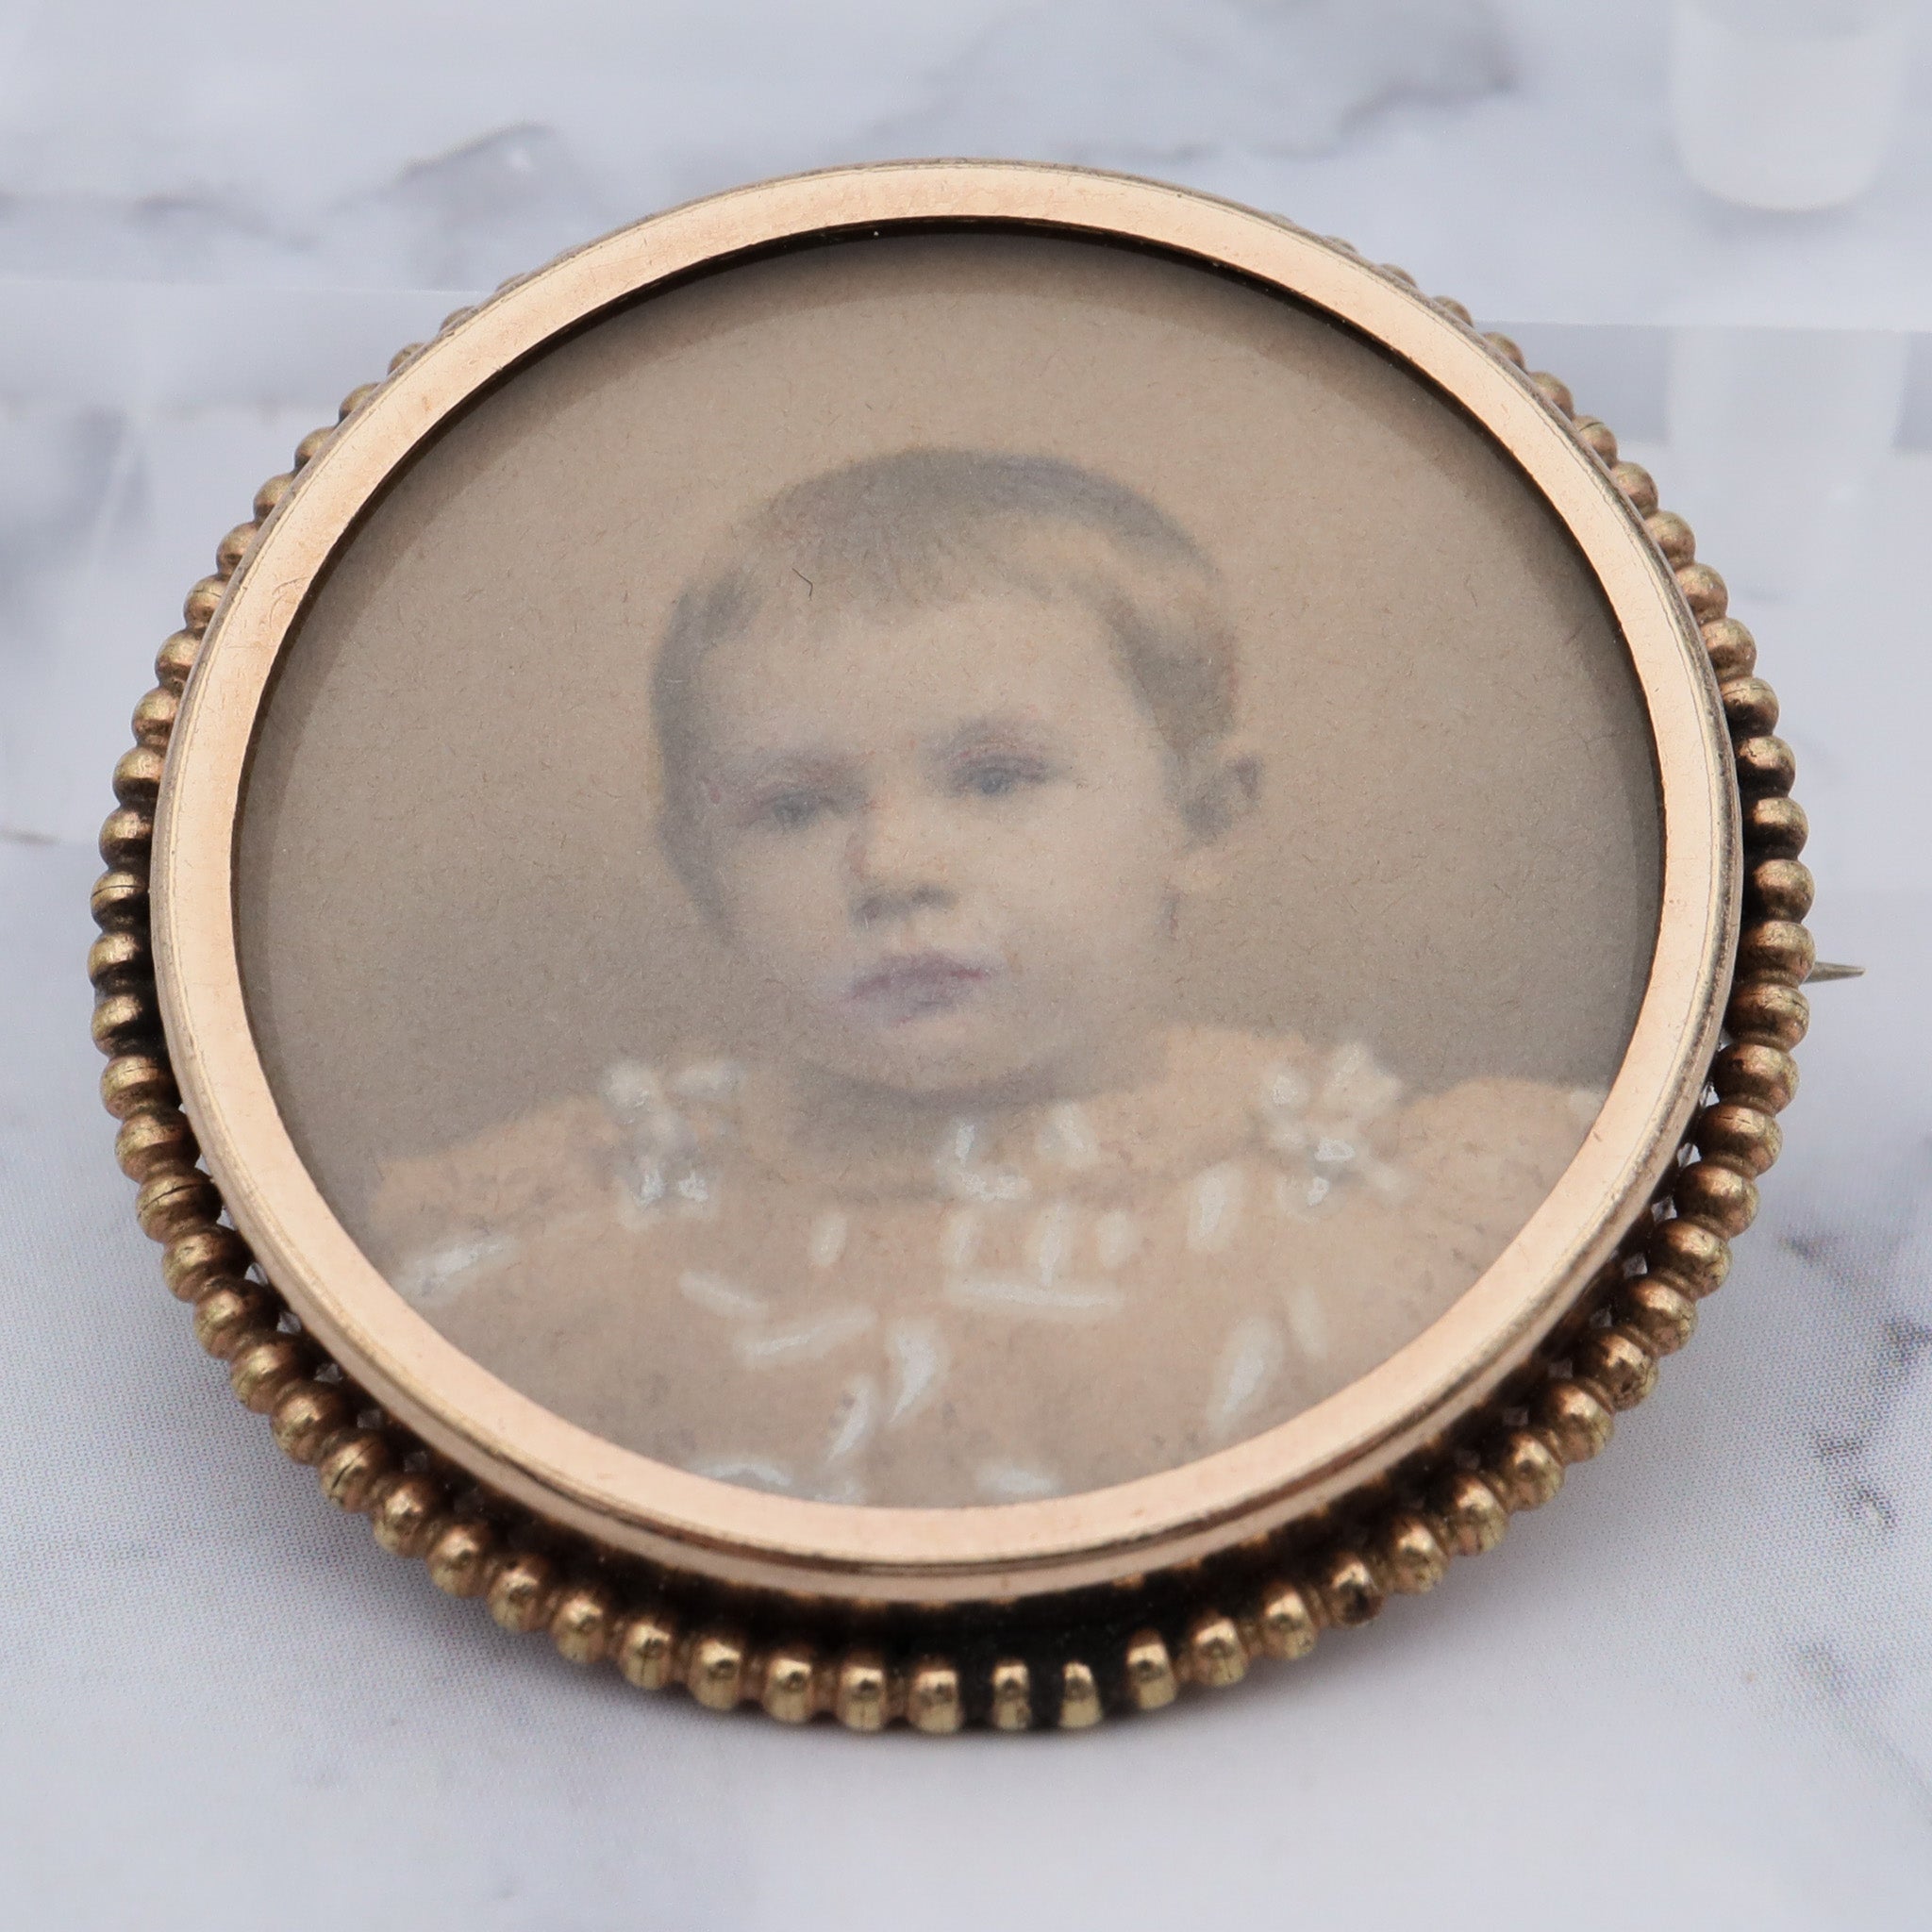 Antique Victorian gold-filled circle brooch with hand painted child’s portrait